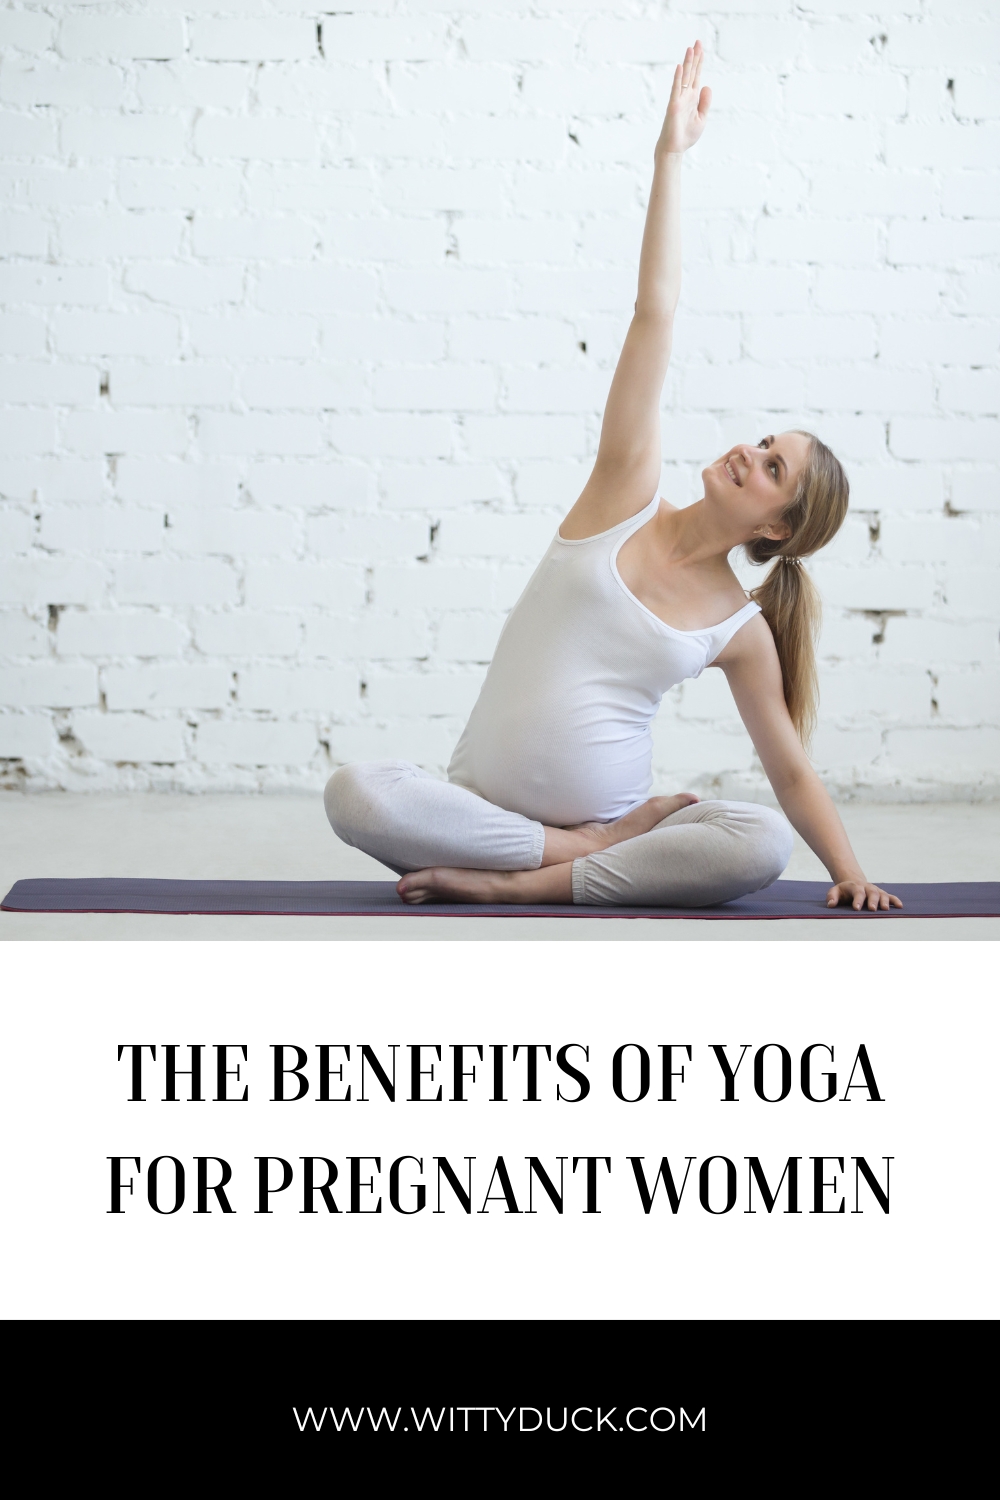 The Benefits of Yoga for Pregnant Women